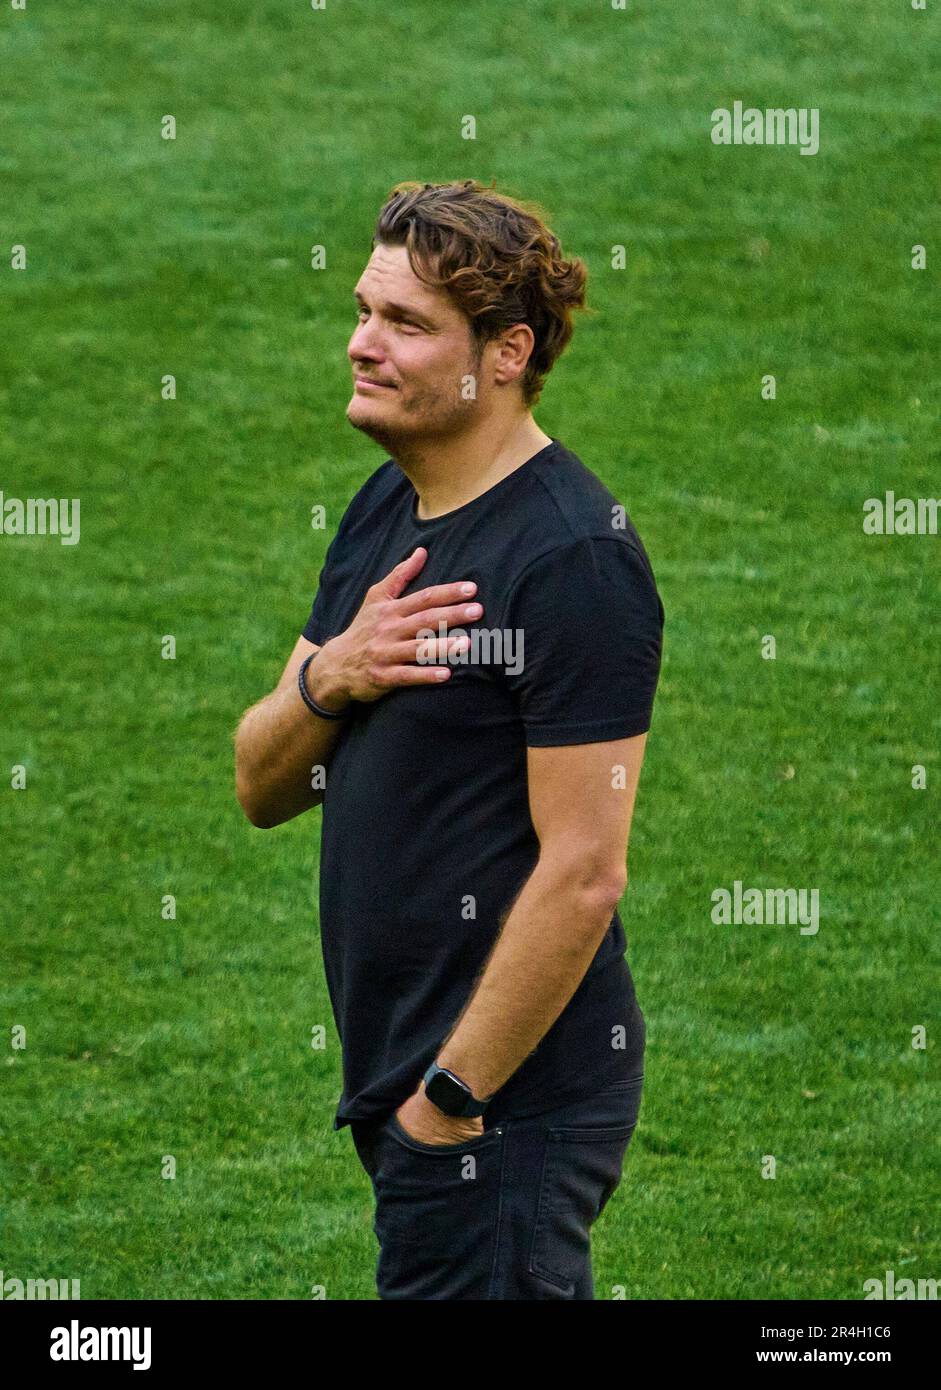 Edin Terzic, head coach, Chef - Trainer BVB  after the match BORUSSIA DORTMUND - FSV MAINZ 05 2-2, BVB lost the chance for the title. 1.German Football League on May 27, 2023 in Dortmund, Germany. Season 2022/2023, matchday 34, 1.Bundesliga, 34.Spieltag, BVB, MZ,  © Peter Schatz / Alamy Live News    - DFL REGULATIONS PROHIBIT ANY USE OF PHOTOGRAPHS as IMAGE SEQUENCES and/or QUASI-VIDEO - Stock Photo